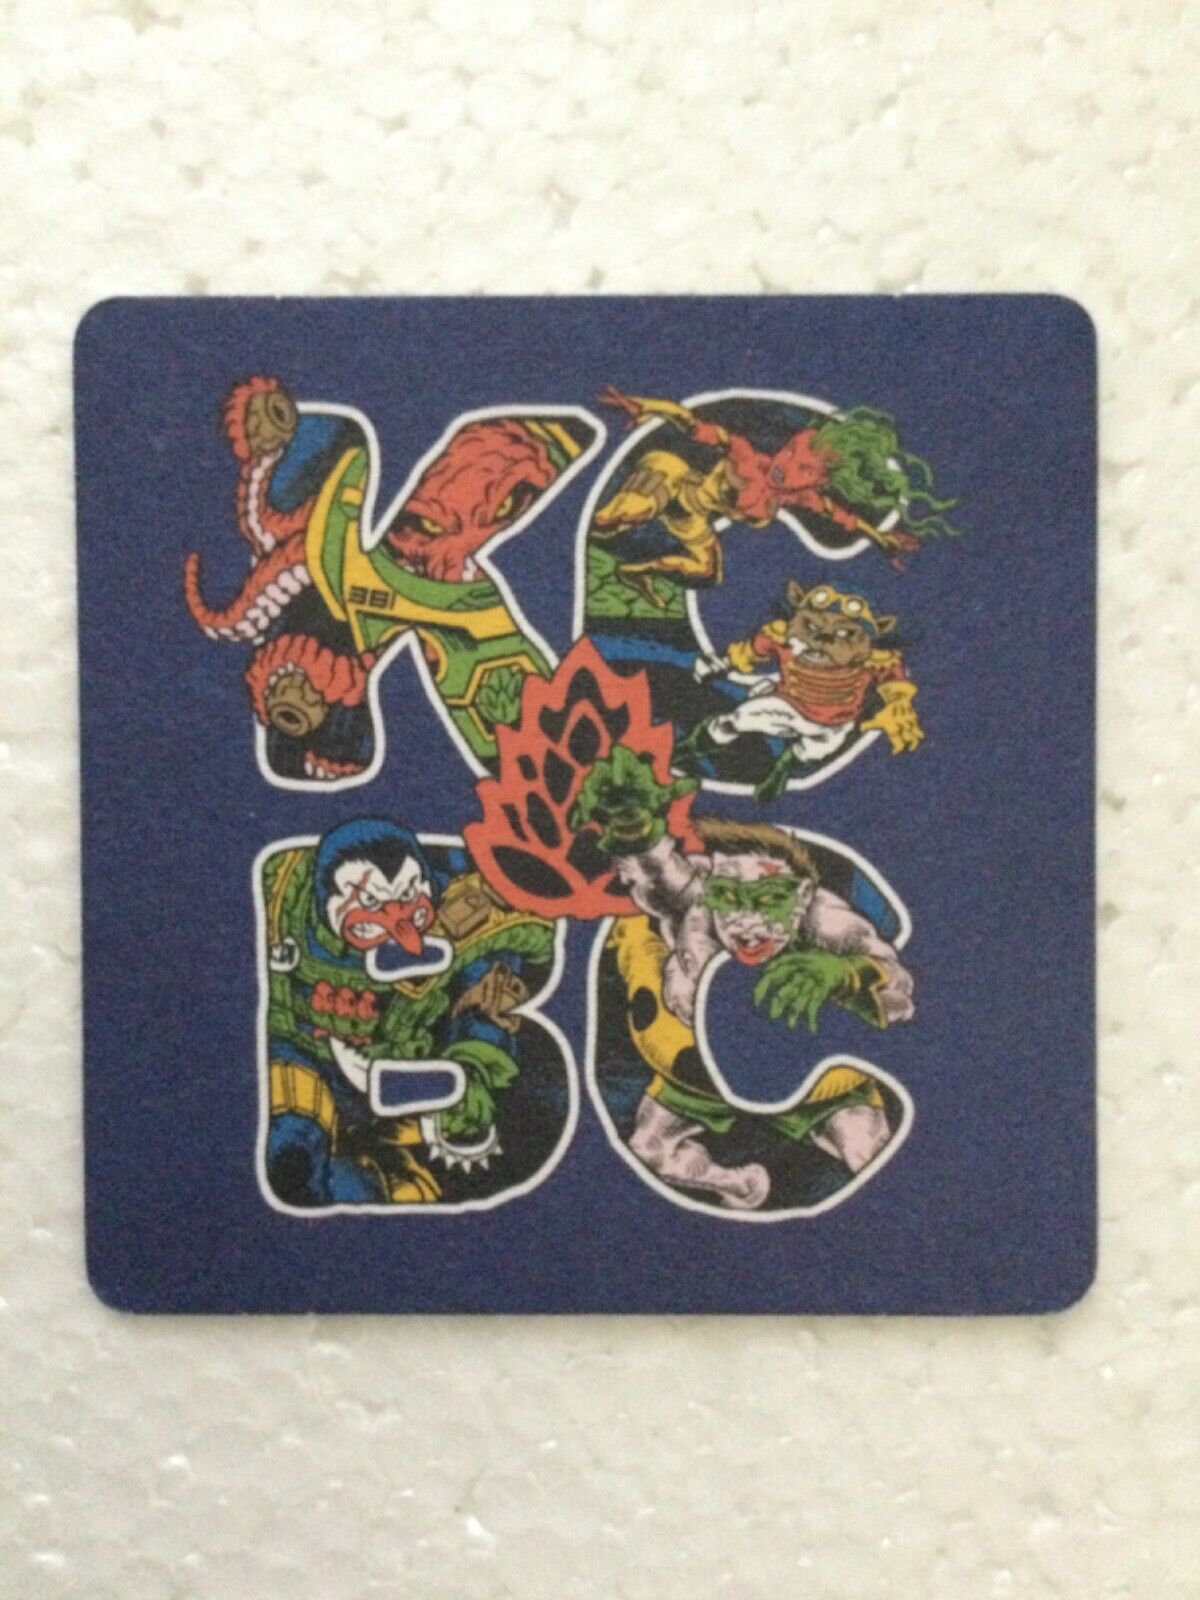 KCBC Kings County Brewers Collective Beer Coaster Brooklyn New York